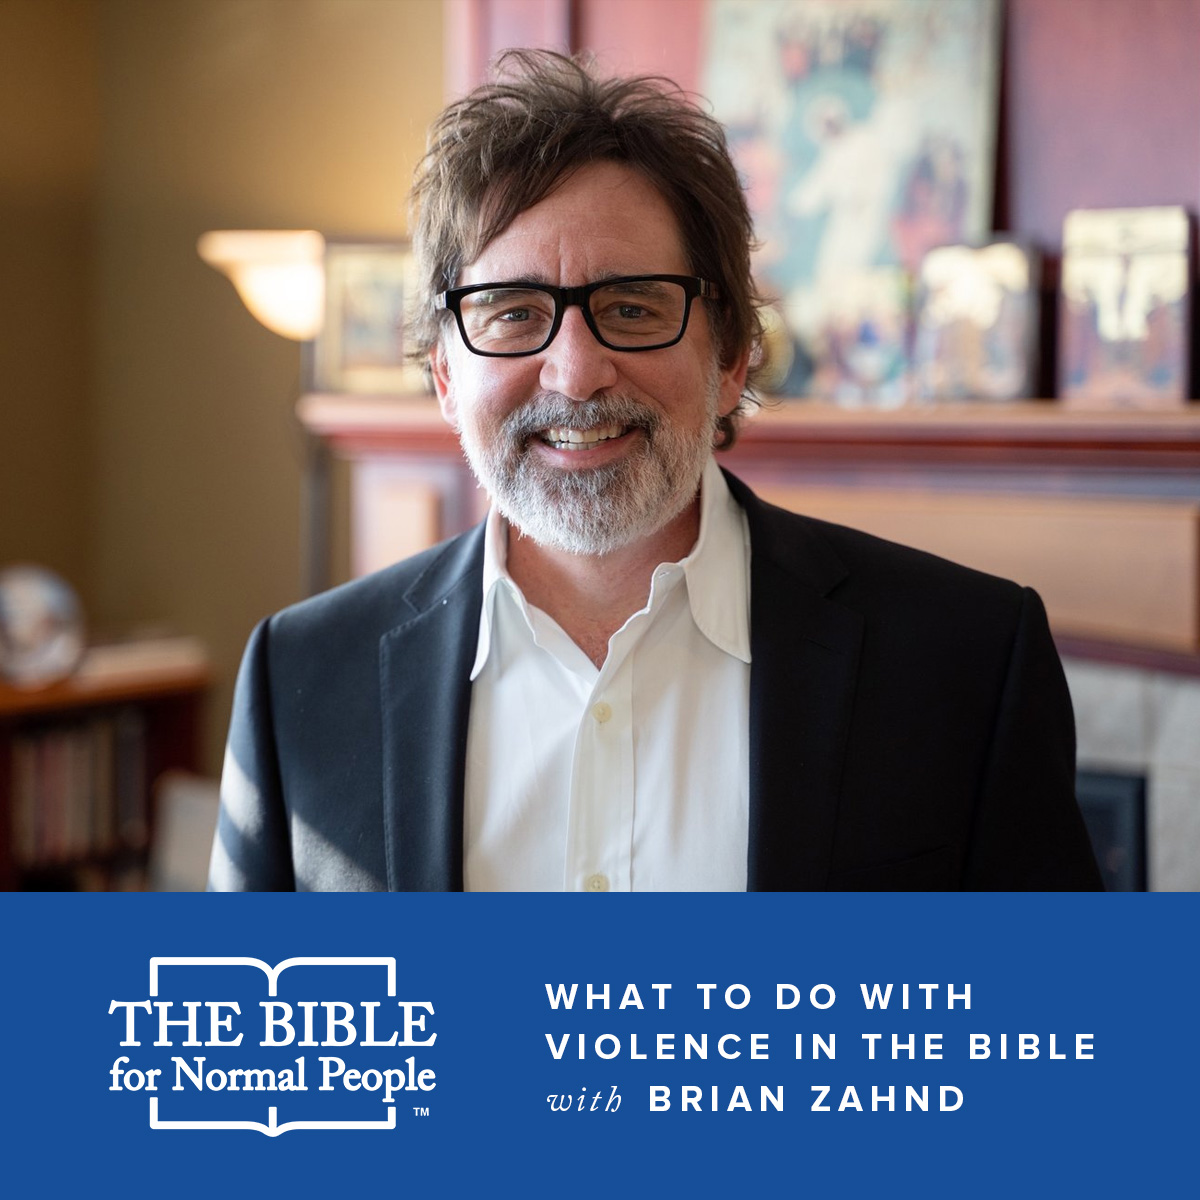 Episode 15: Brian Zahnd – Violence in the Bible and What to Do with It